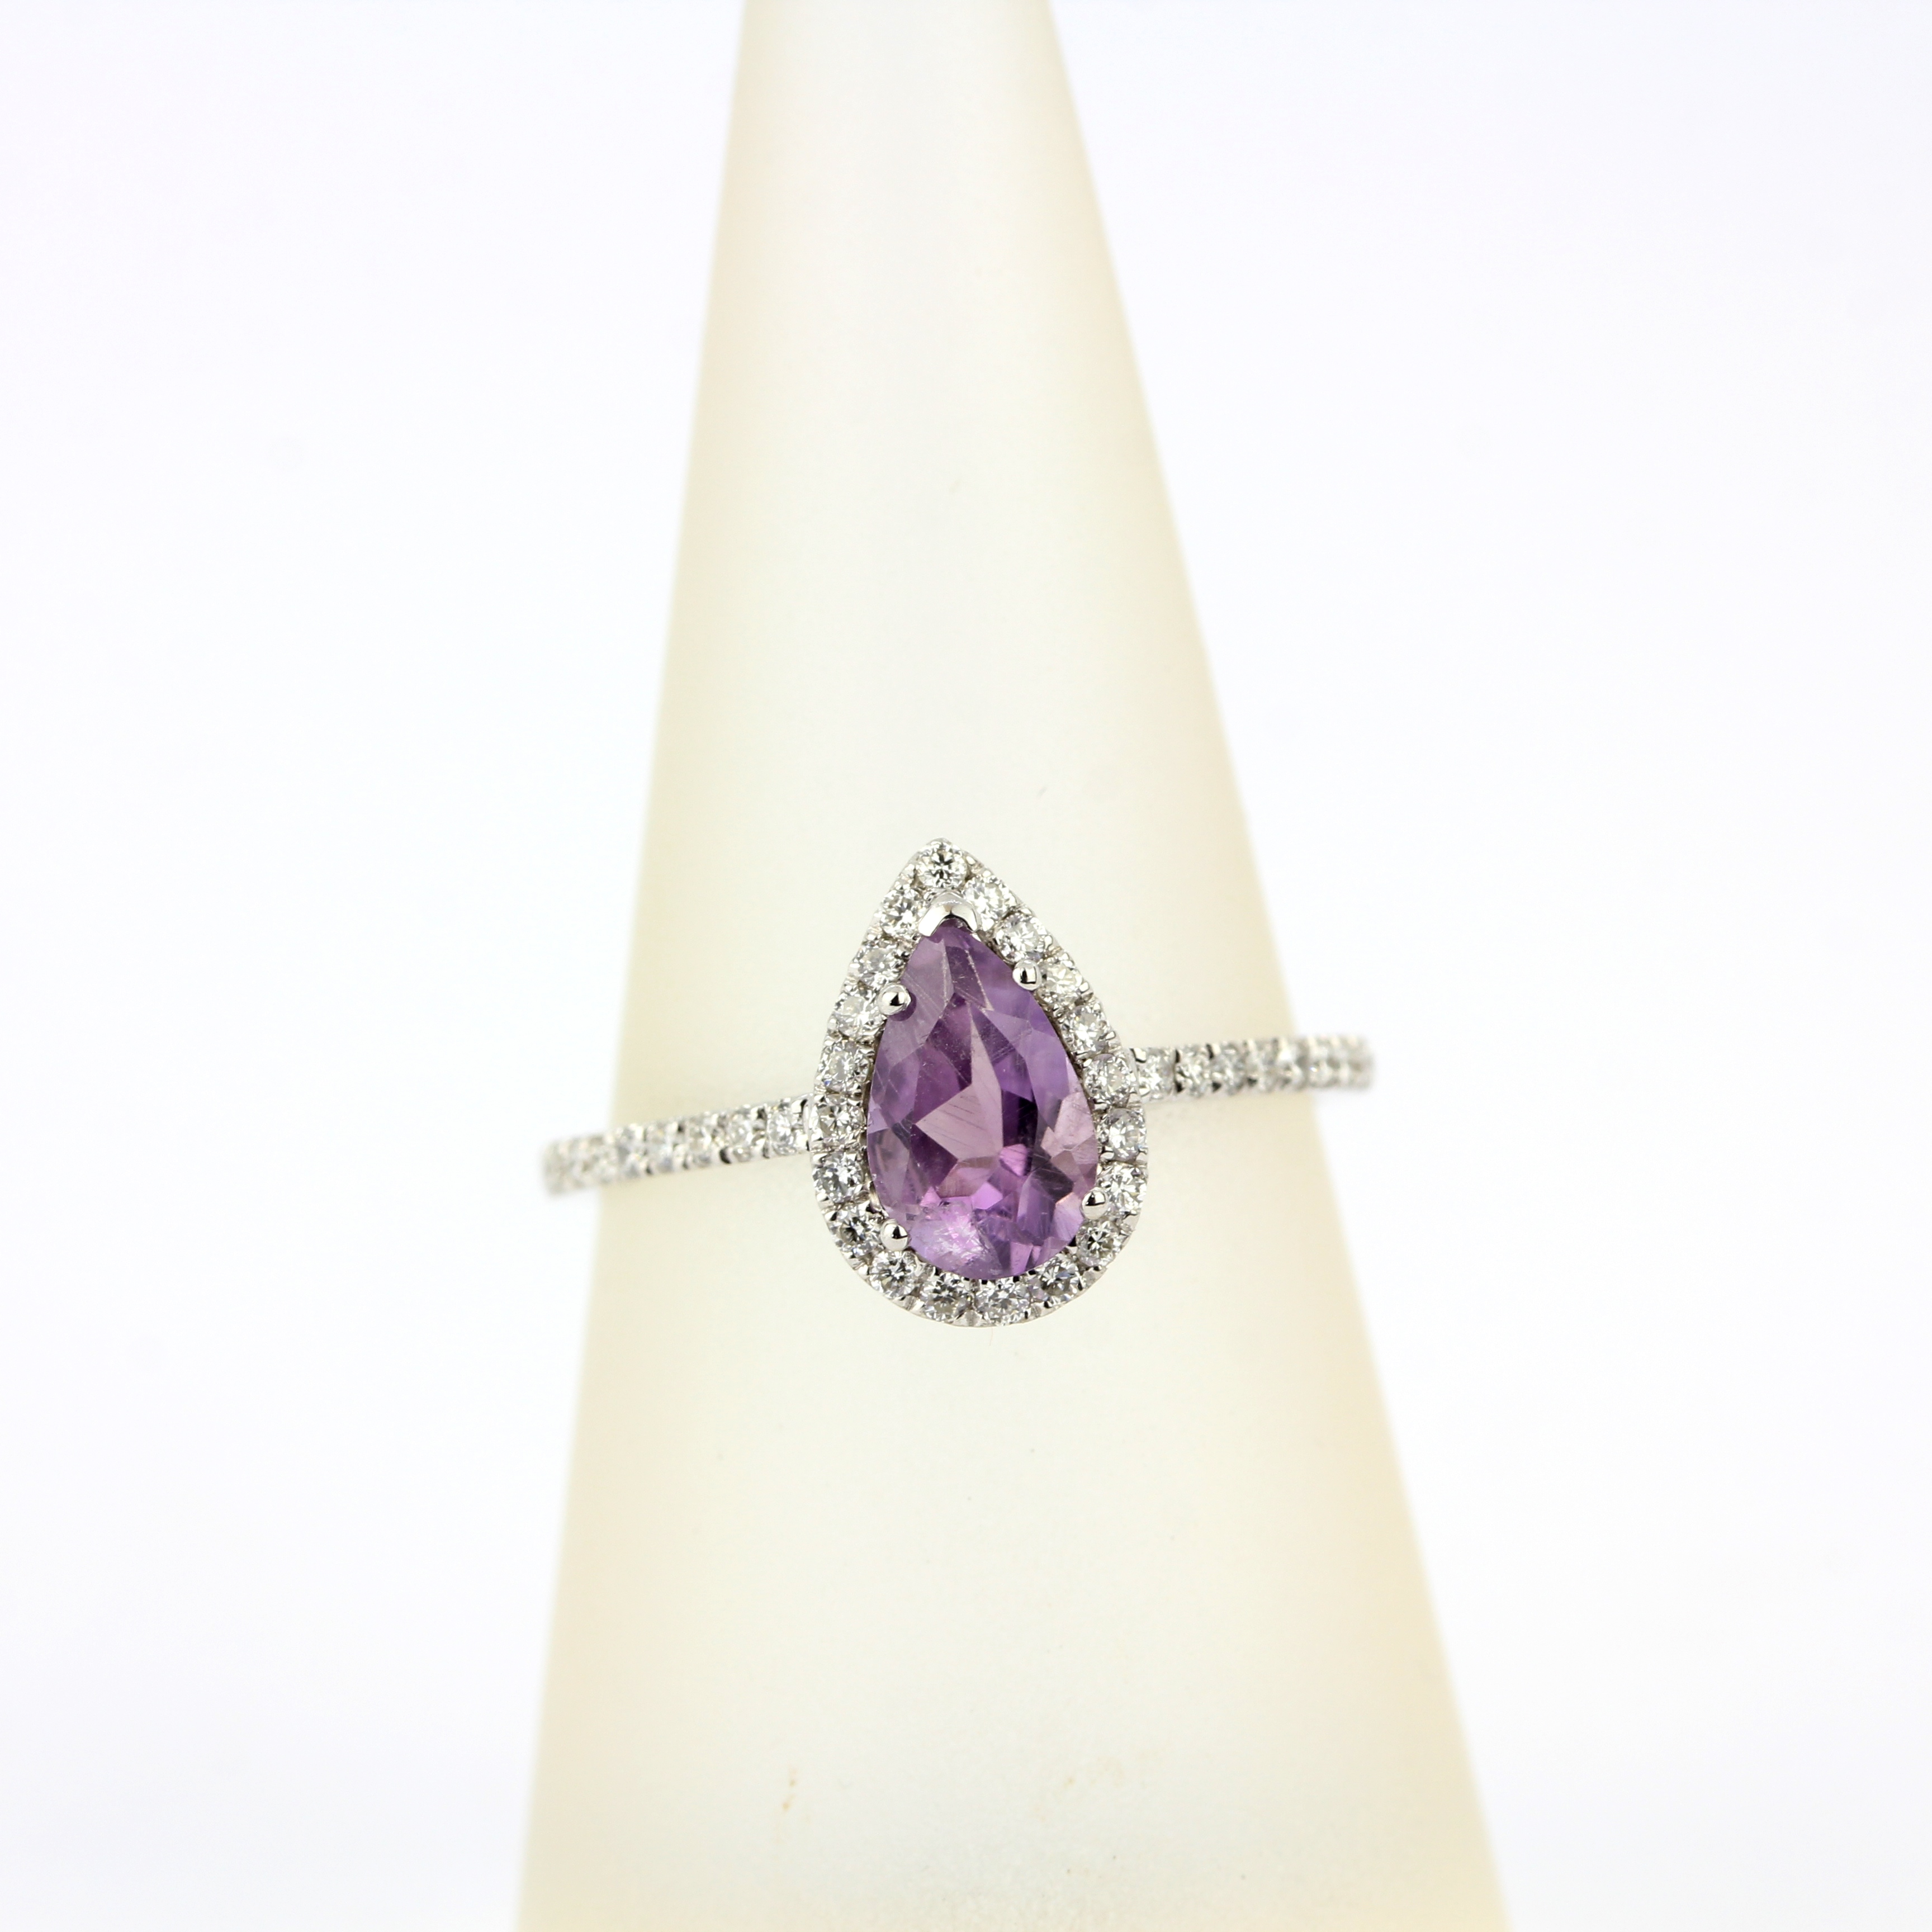 A 9ct white gold ring set with a pear cut amethyst and diamonds, ring size N. - Image 3 of 3